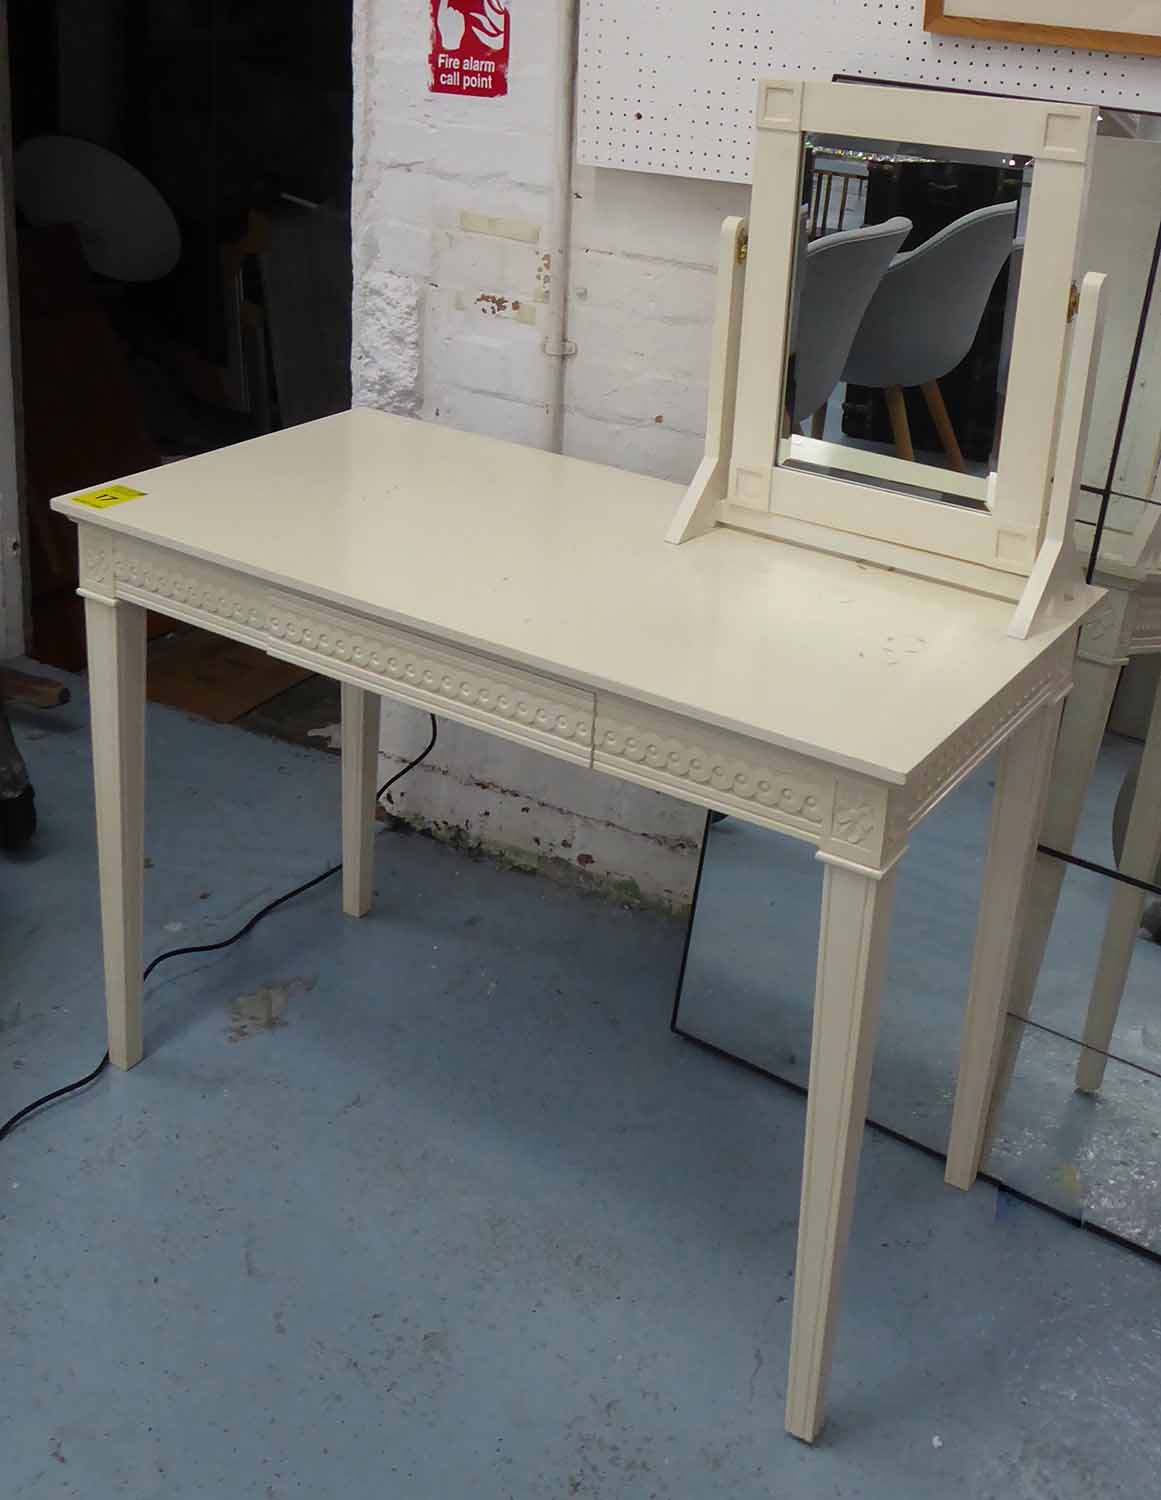 VANITY SUITE, Swedish country house style, white painted table and mirror, 101.5cm x 53cm x 74.5cm. - Image 2 of 4